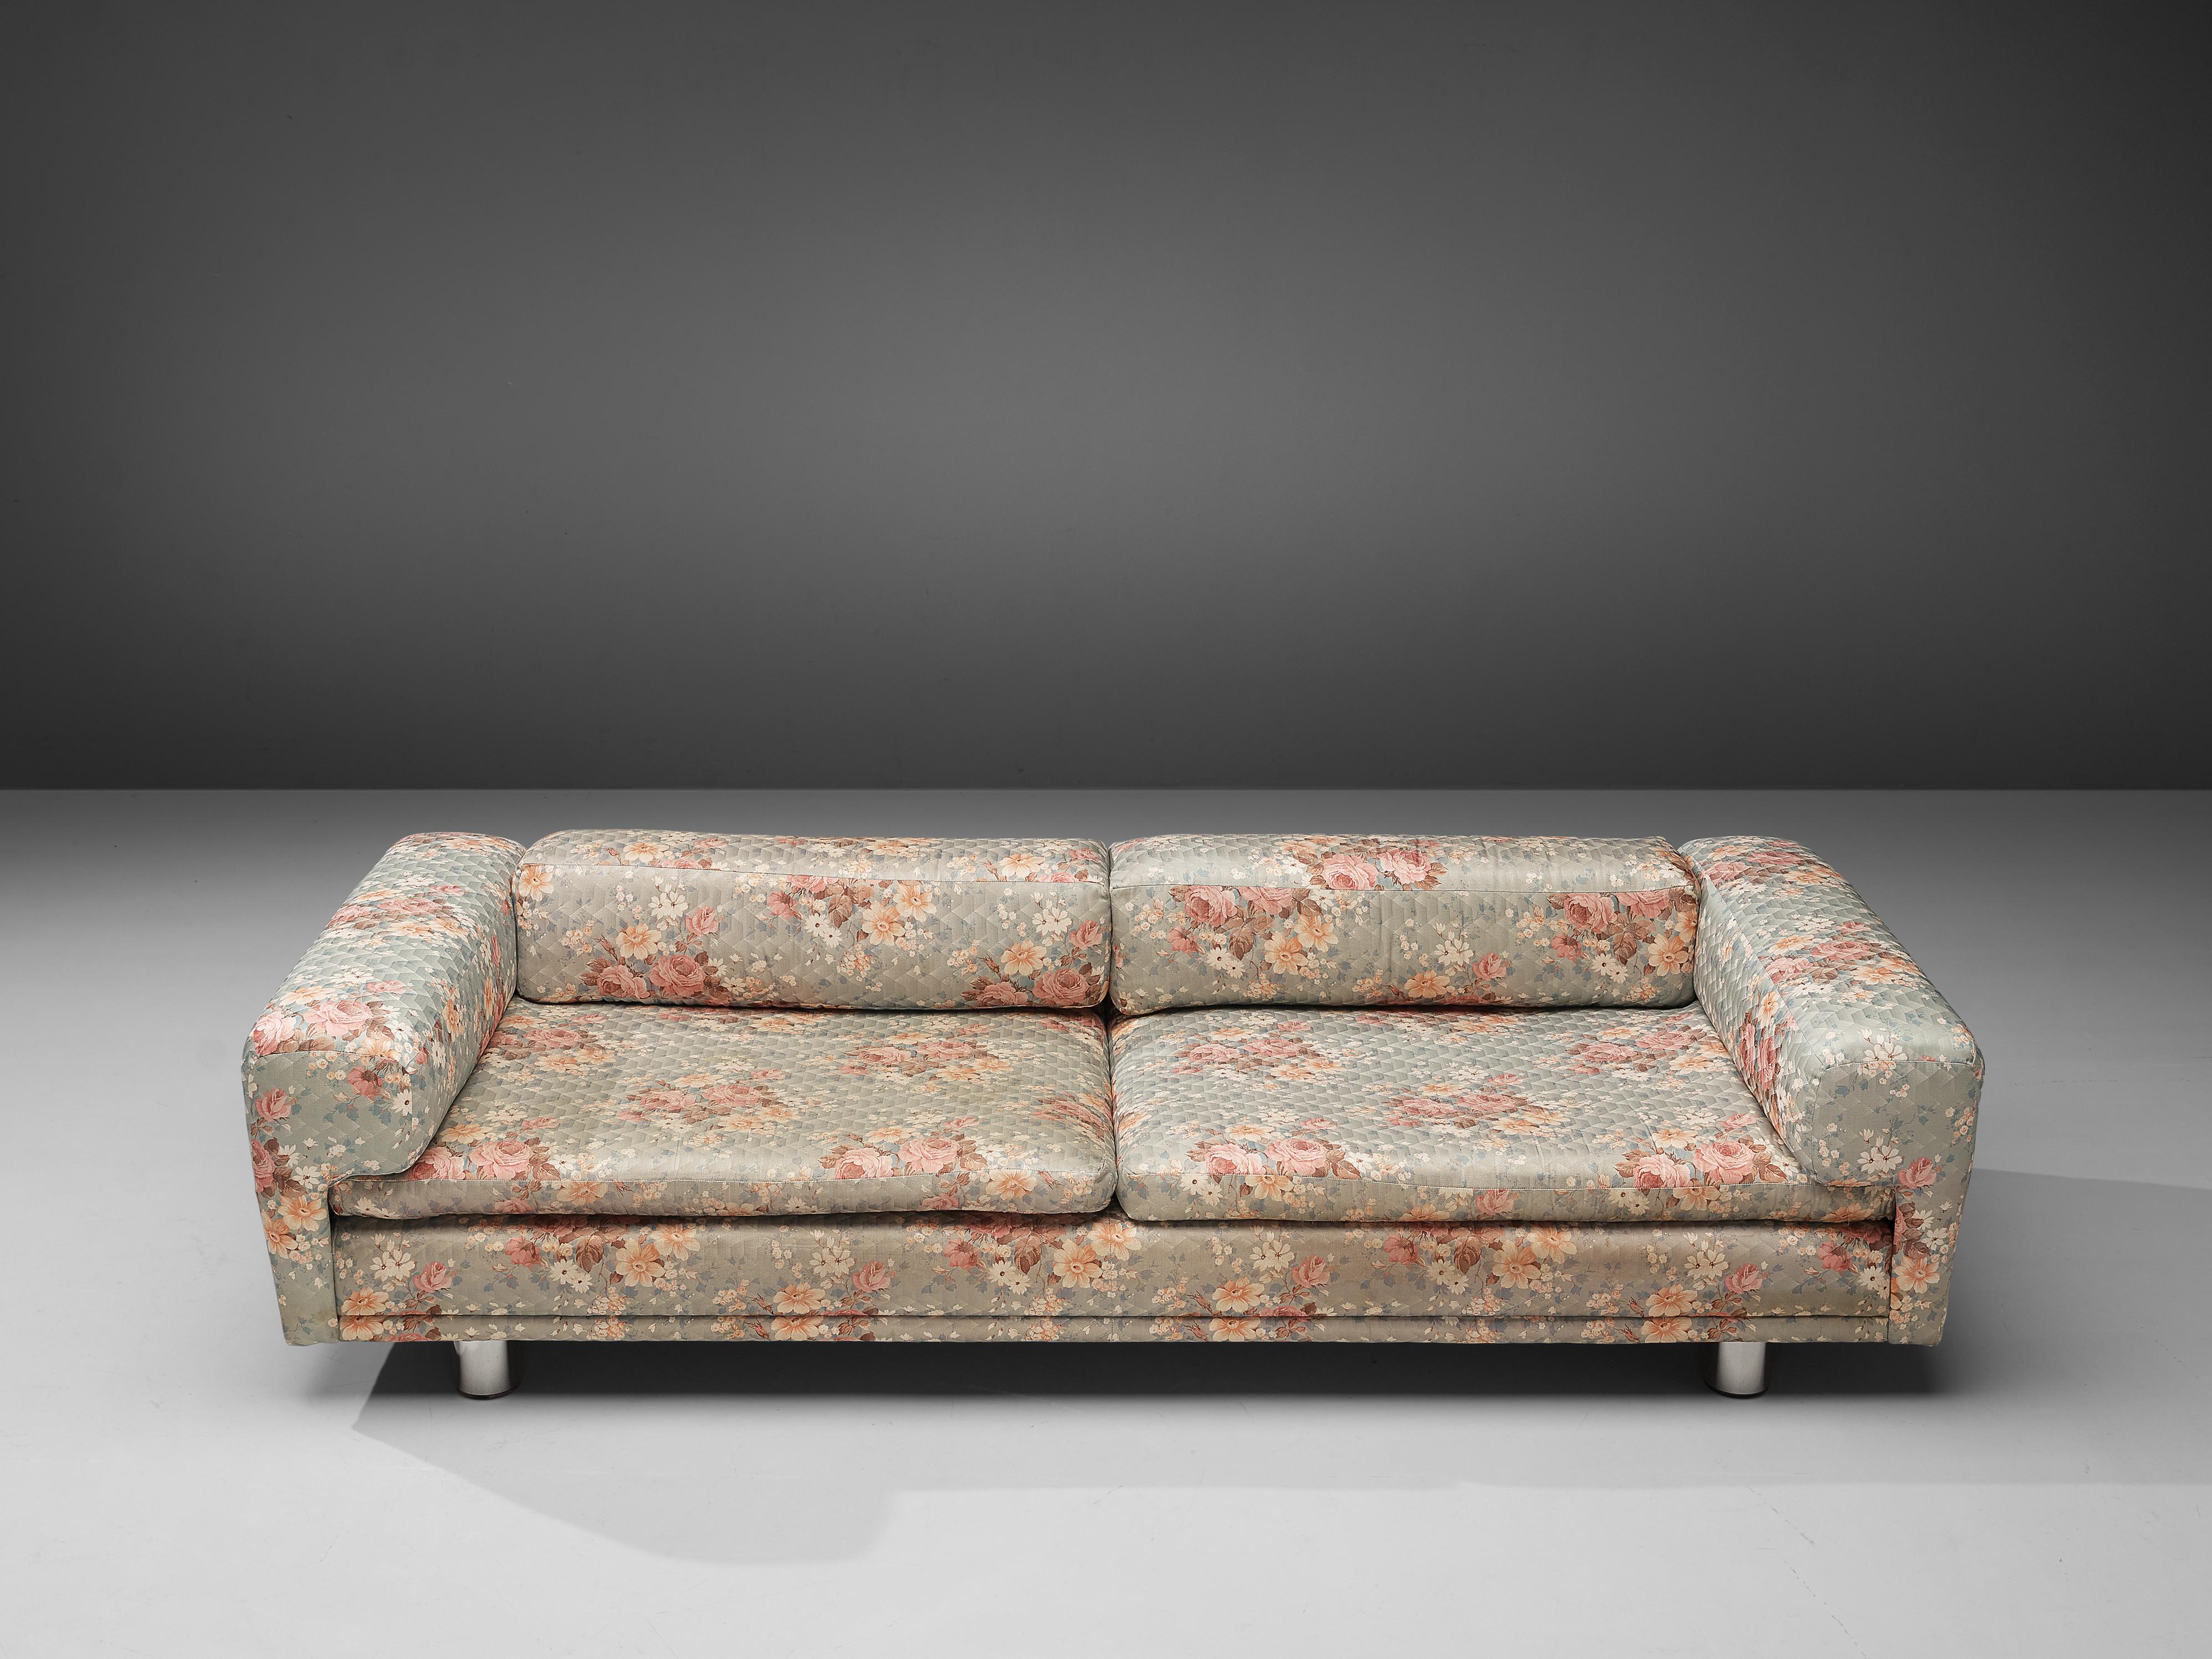 20th Century Howard Keith Grand 'Diplomat' Sofa in Bright Floral Upholstery